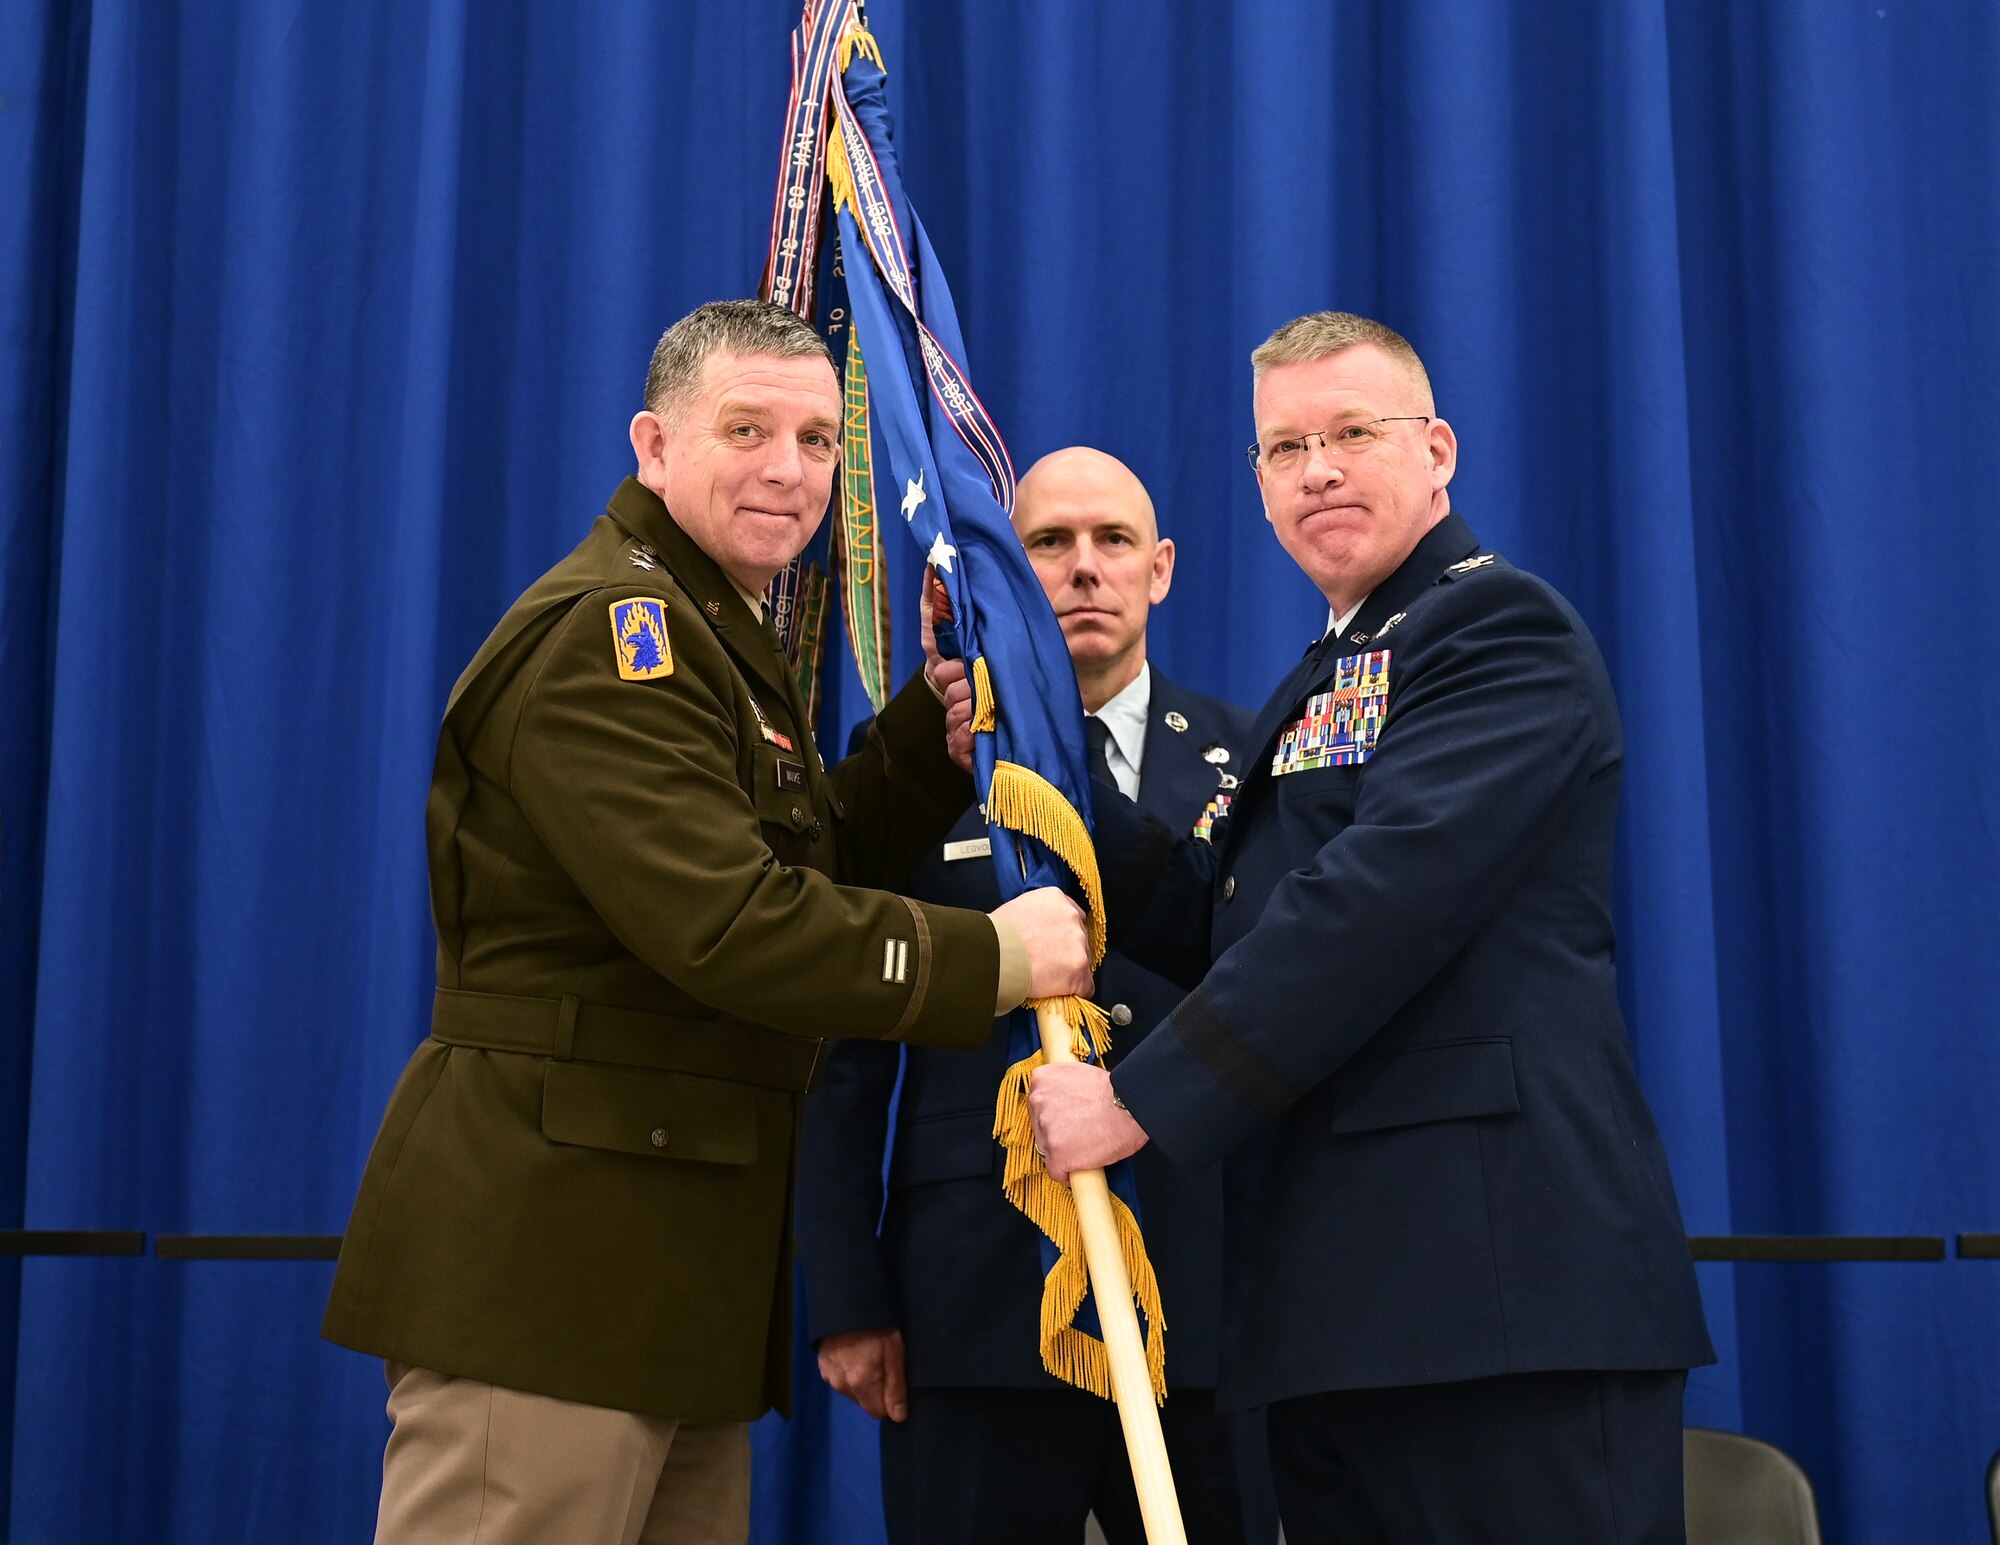 U.S. Air Force Col. James Cleet, right, relinquishes command of the 133rd Airlift Wing to U.S. Army Maj. Gen. Shawn Manke, Adjutant General, Minnesota National Guard, in St. Paul, Minn., March 4, 2023.